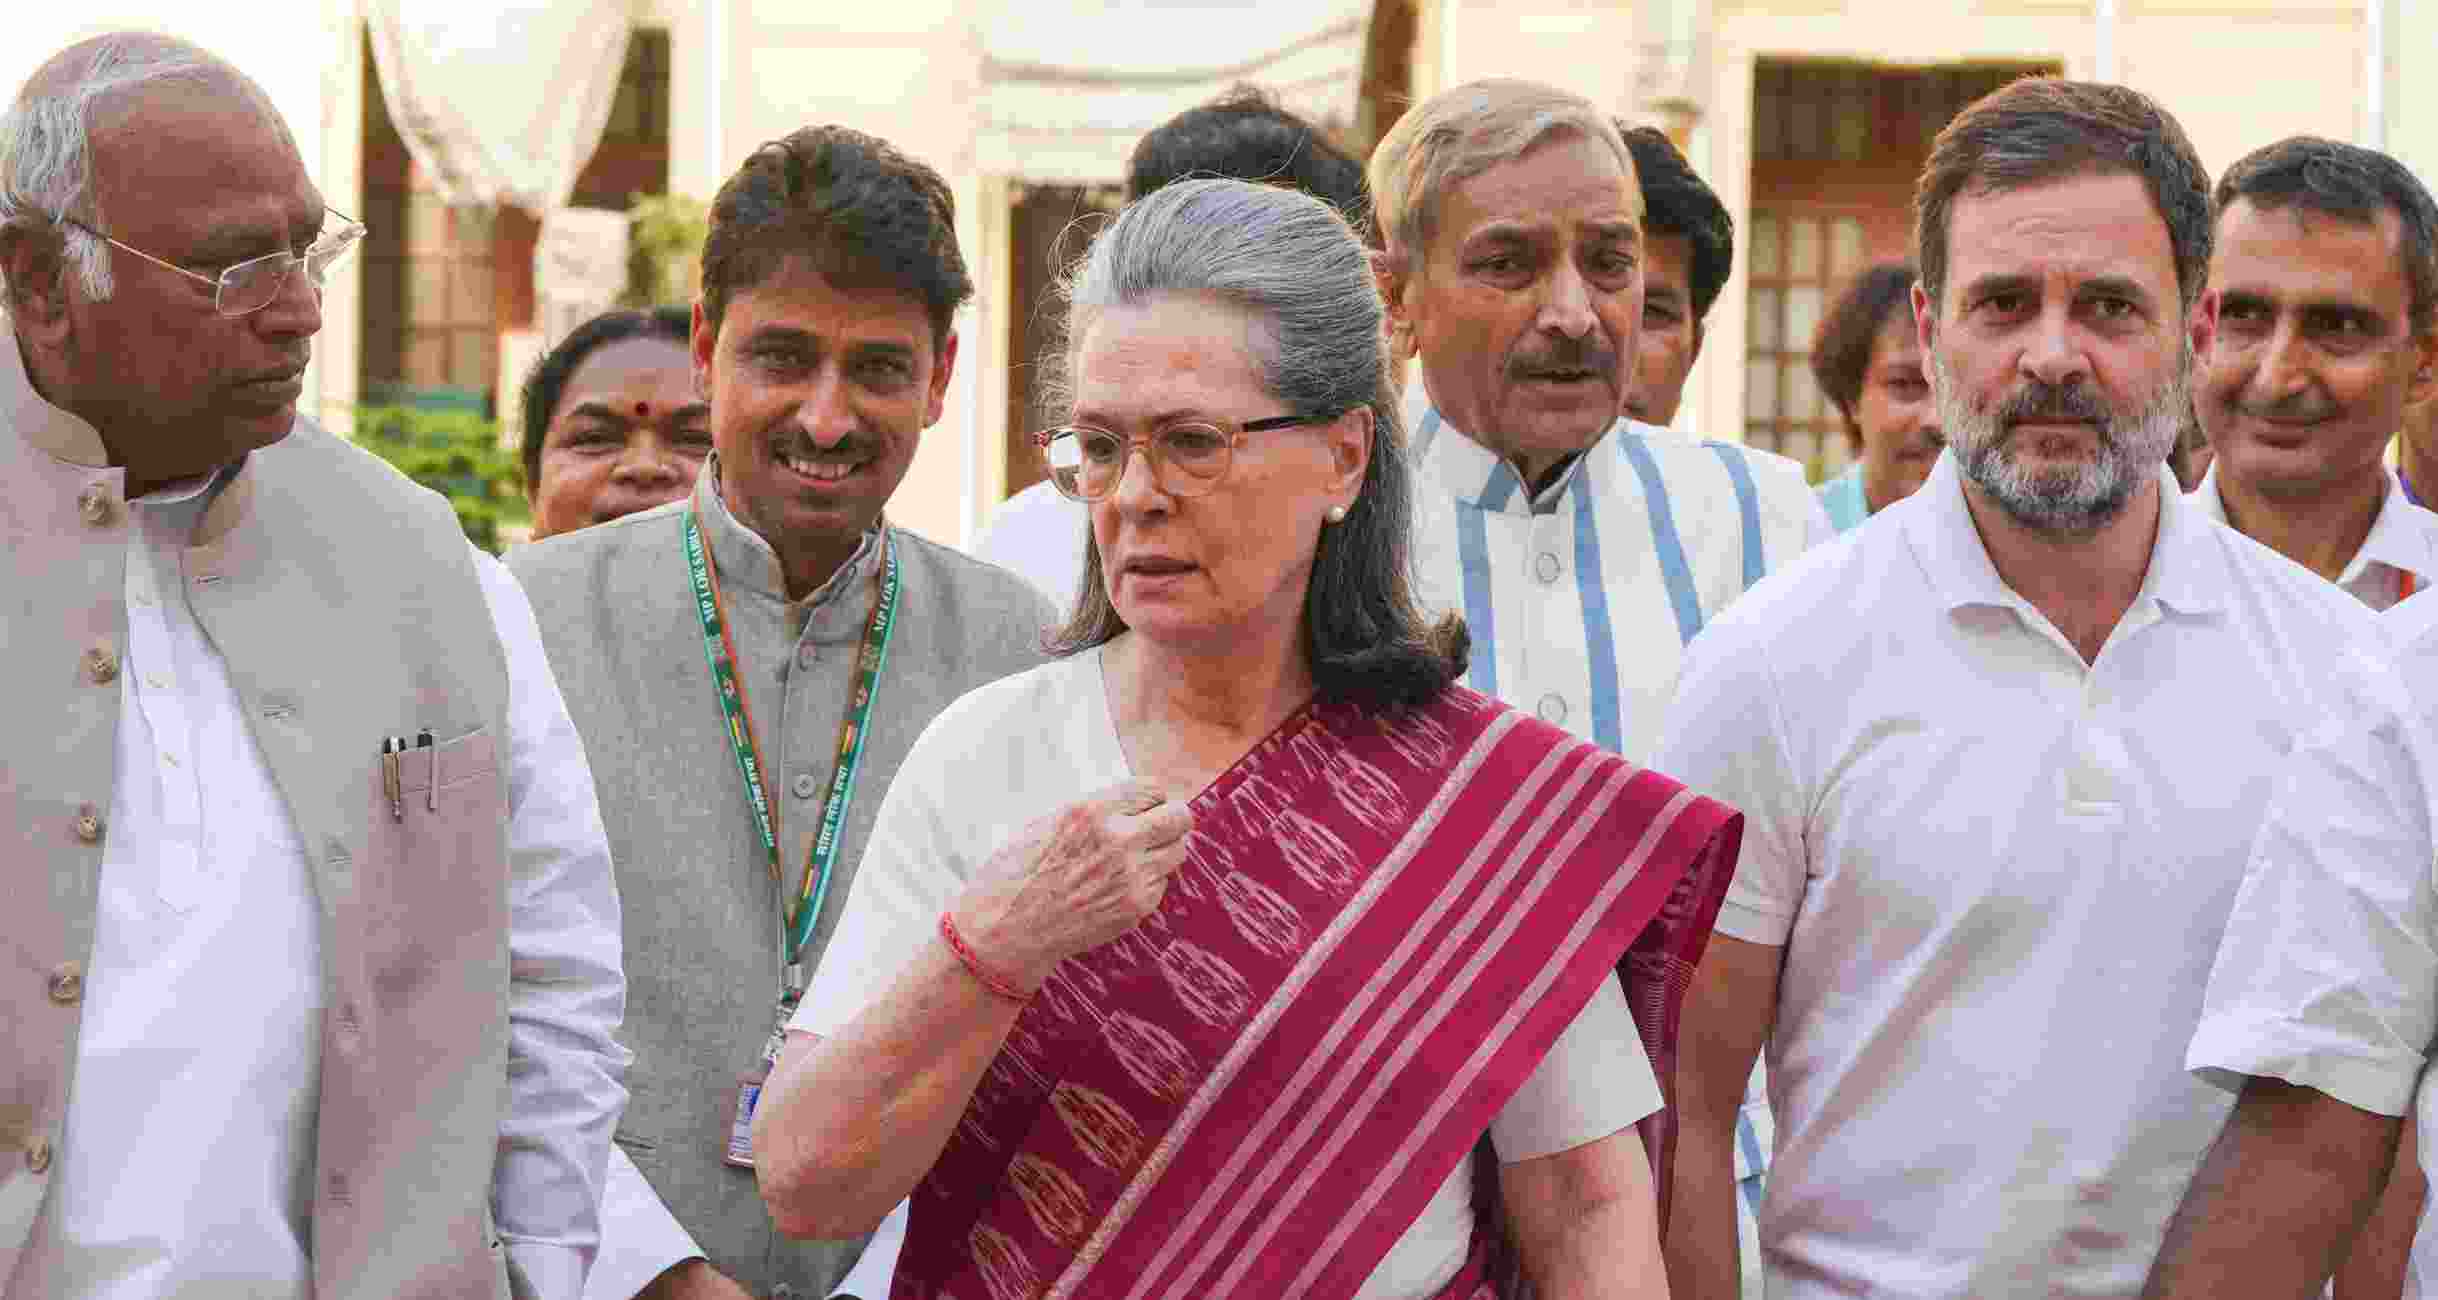 Congress leader Sonia Gandhi along with party members after being unanimously elected as Chairperson of the Congress Parliamentary Party.